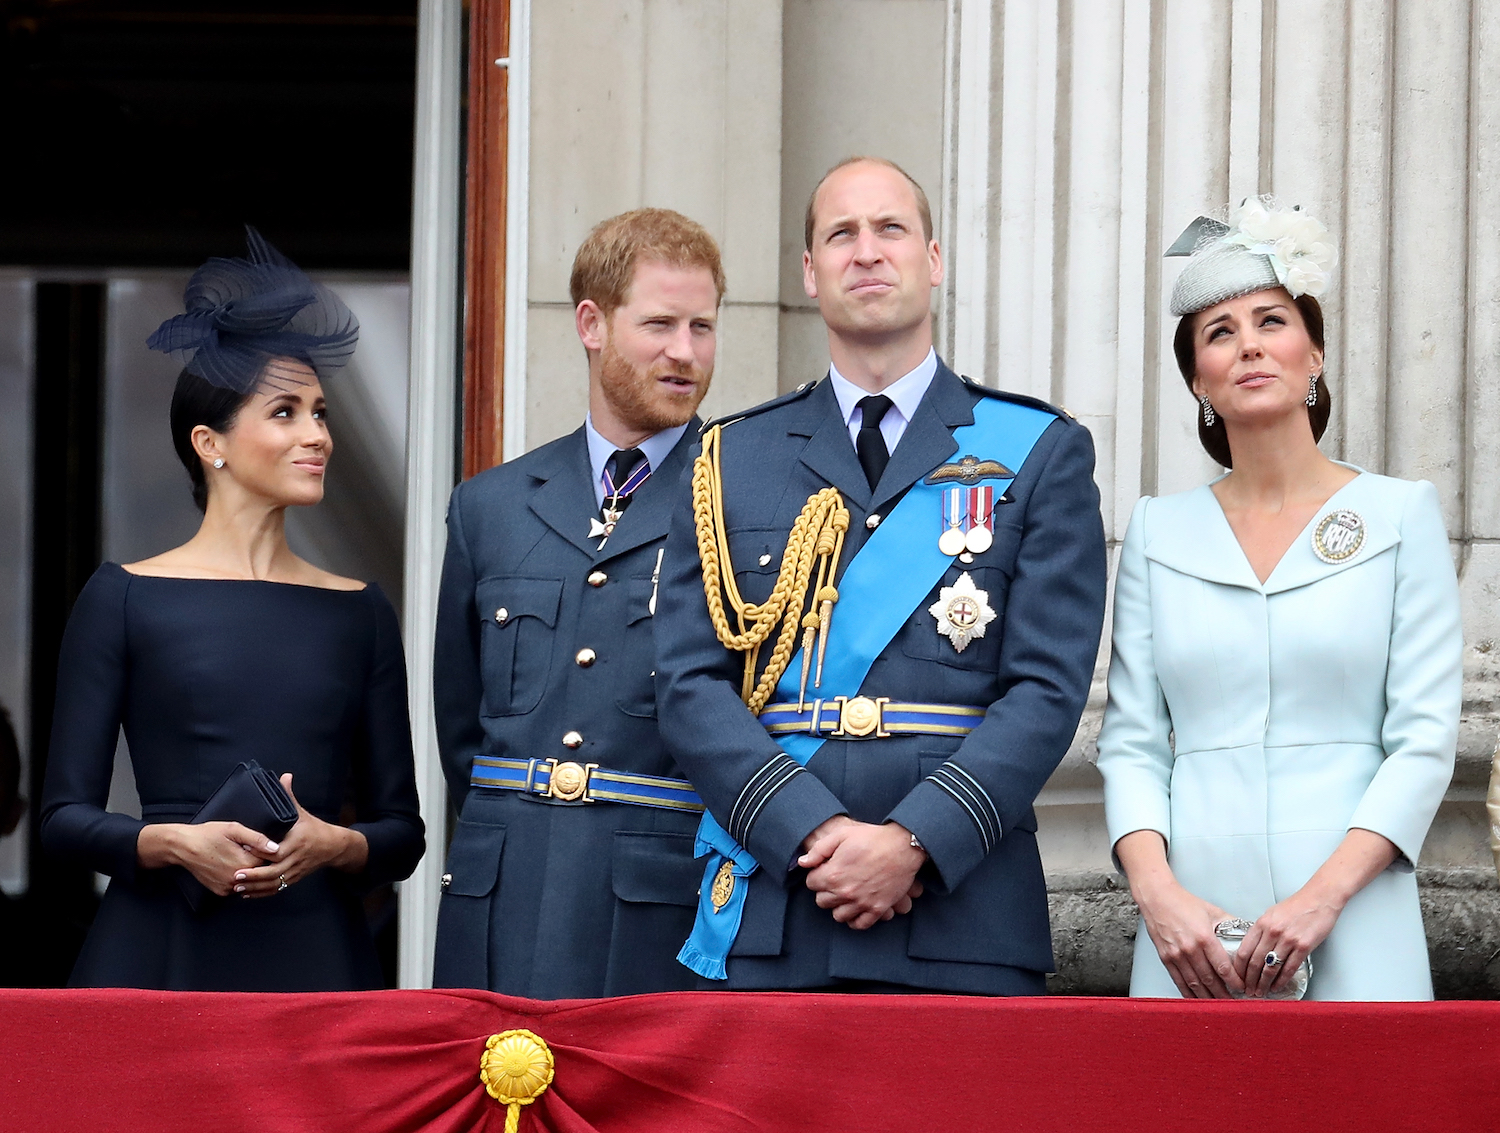 Prince Harry, Meghan Markle, Prince William, and Kate Middleton on the balcony of Buckingham Palace, as members of the Royal Family attend events to mark the centenary of the RAF